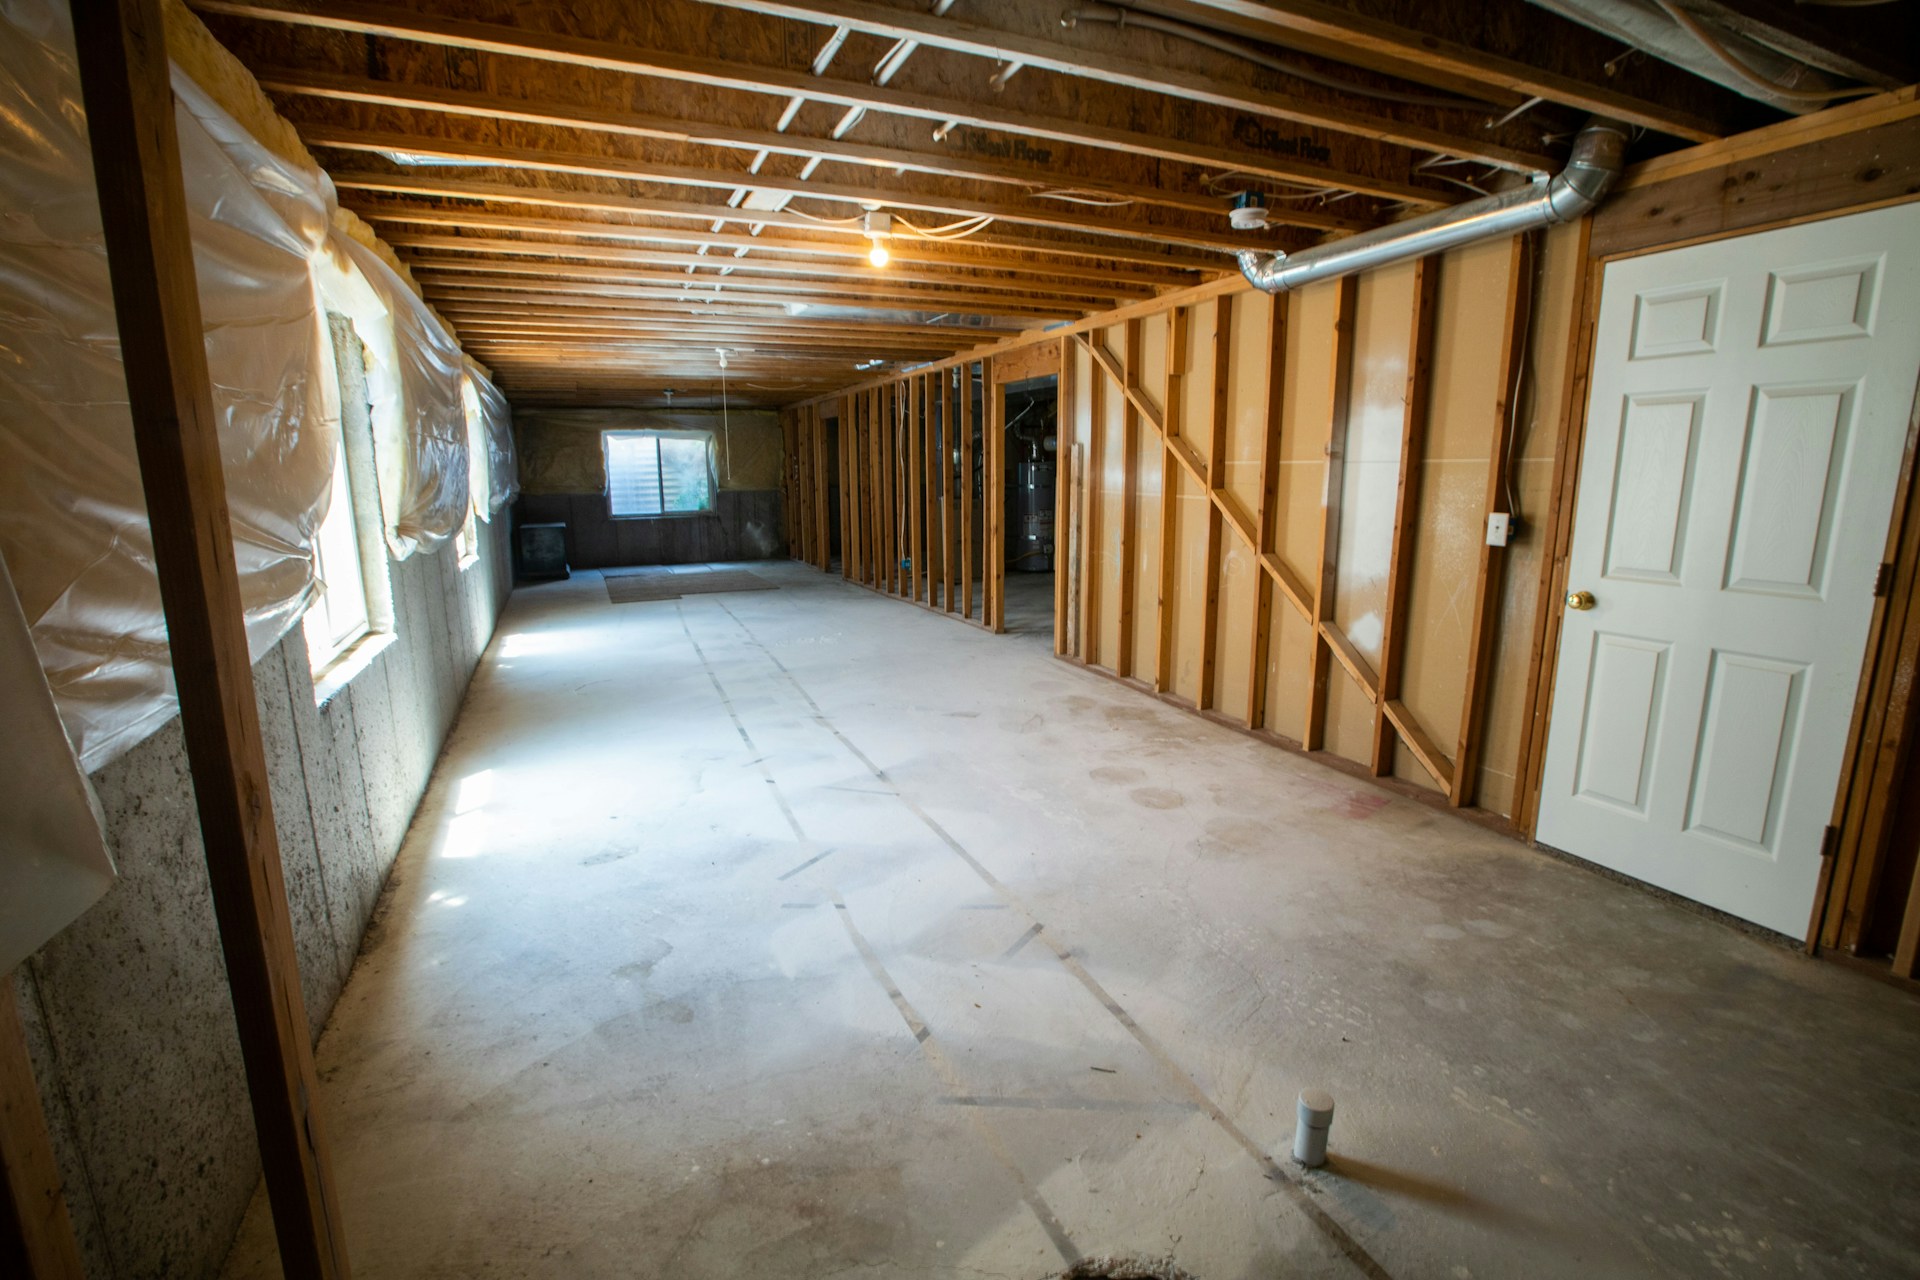 How to Ventilate a Basement